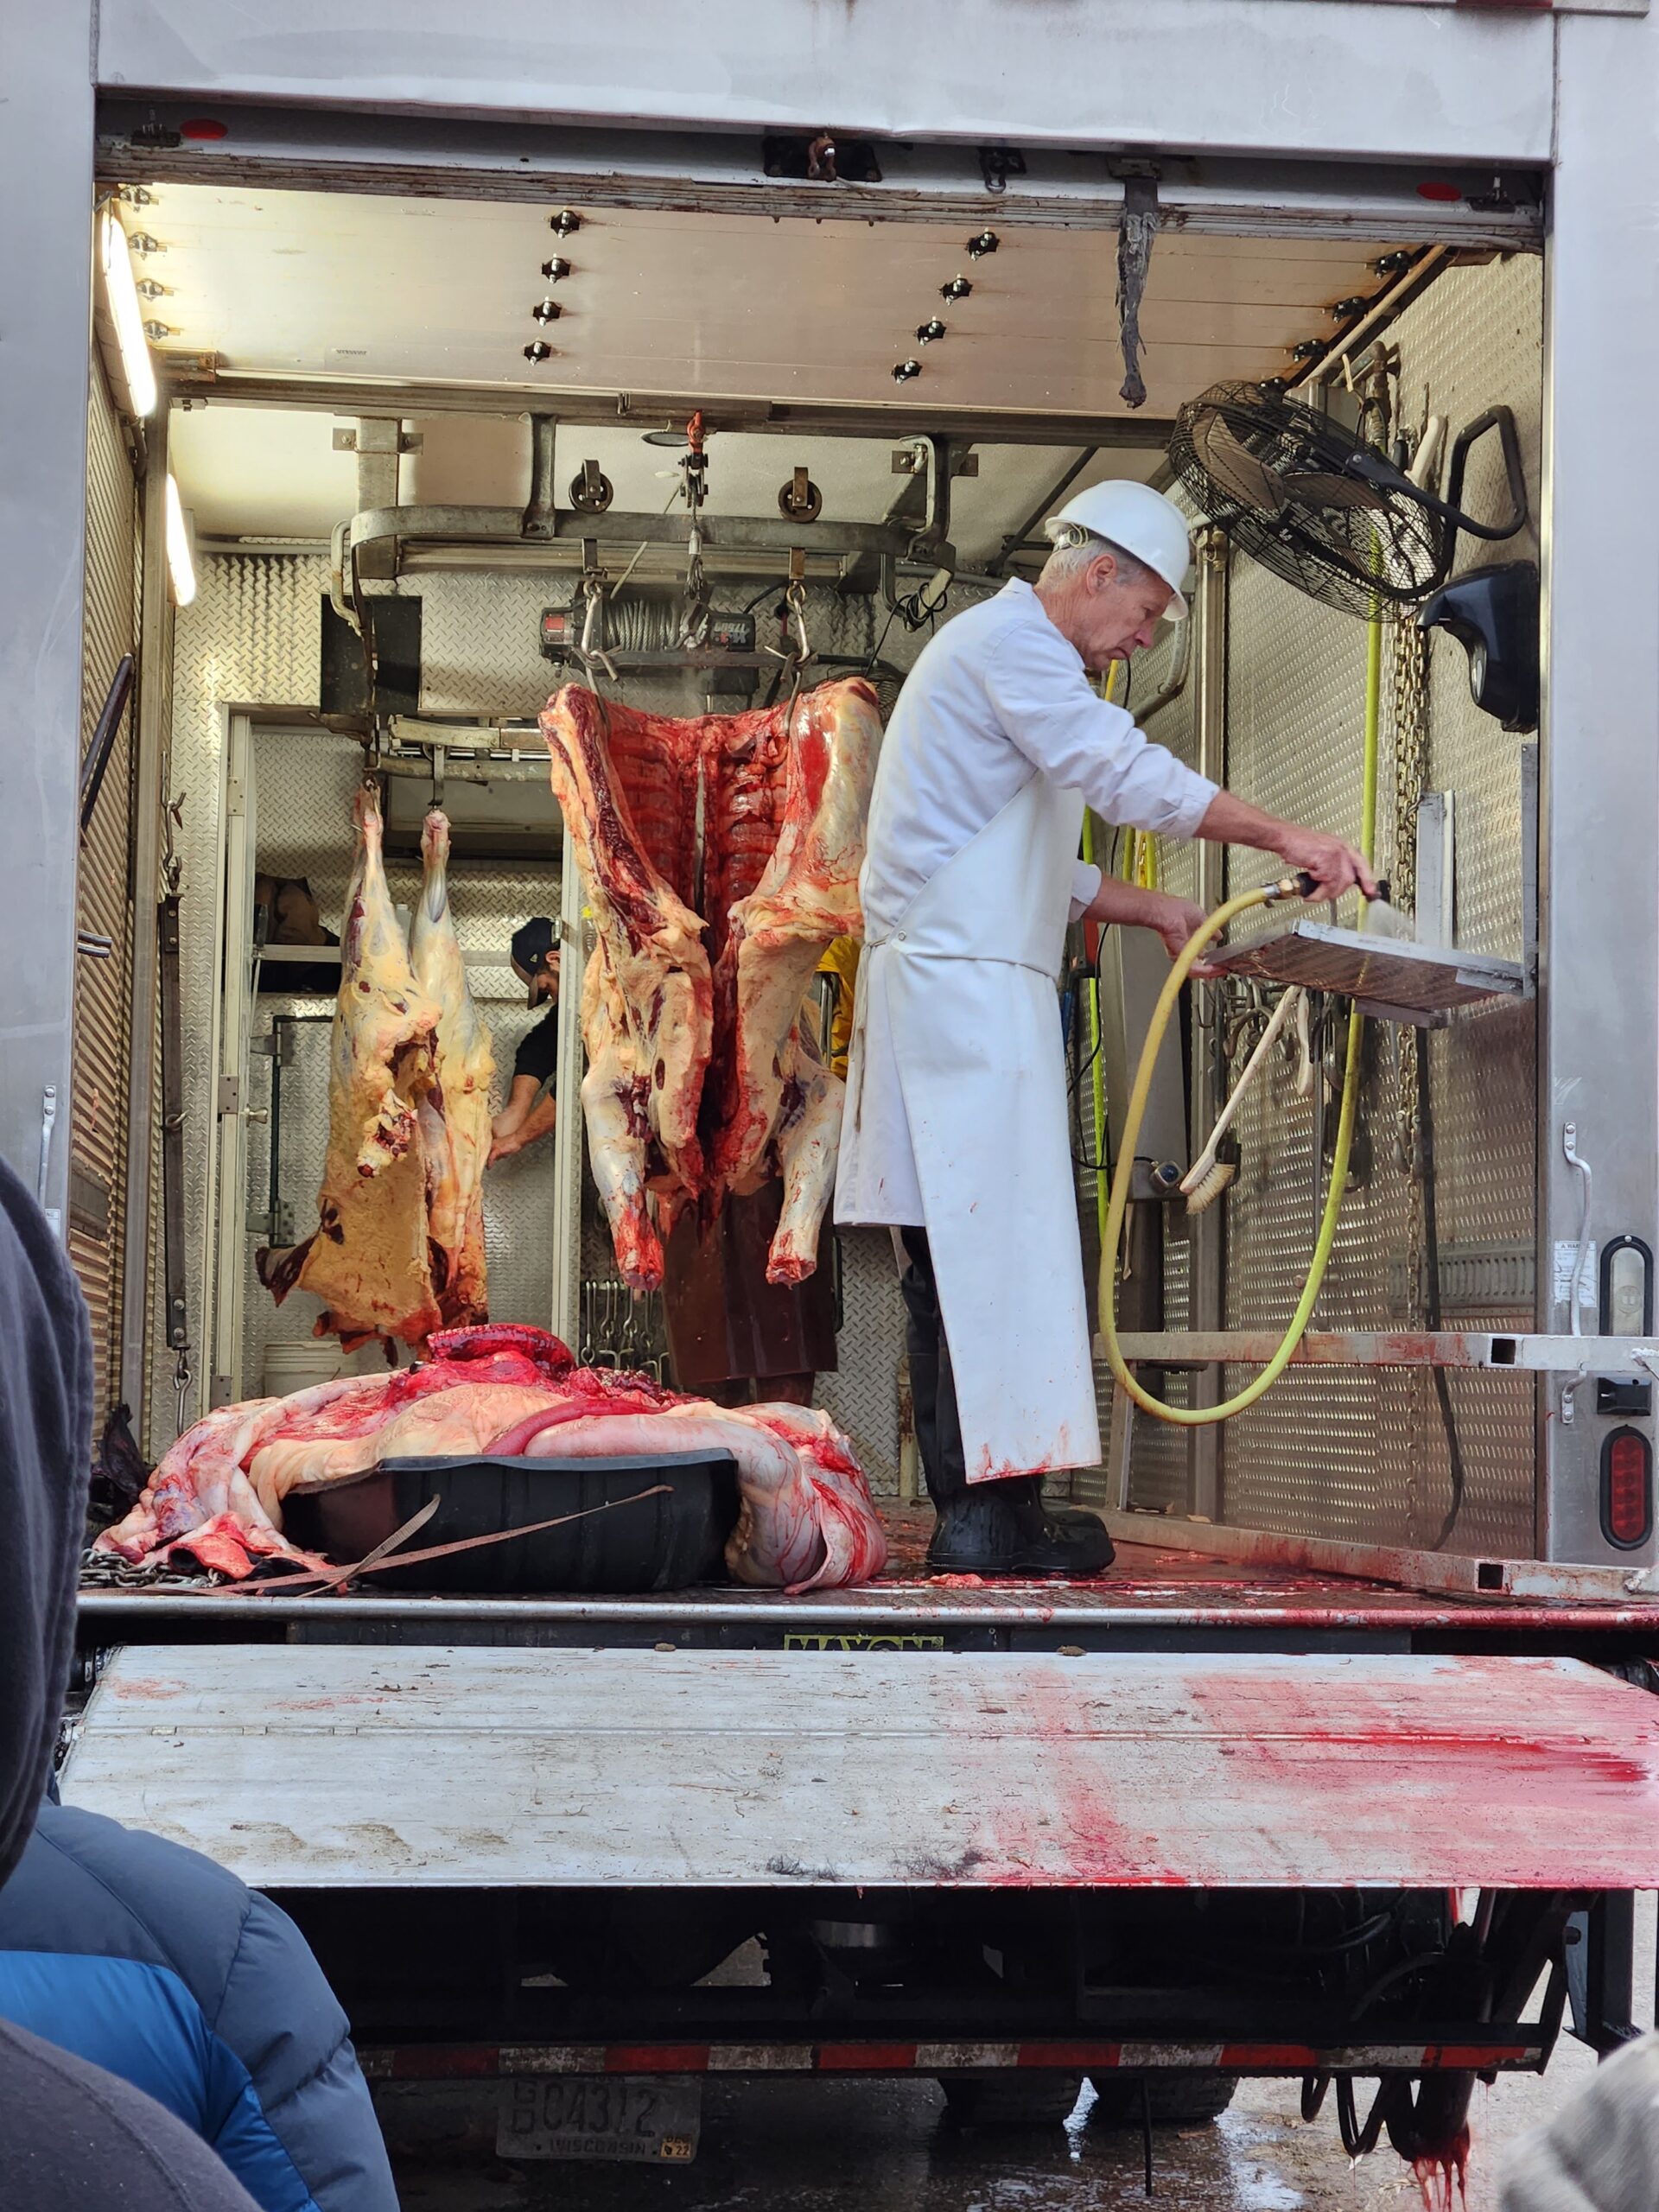 A man stands in the back of a track butchering meat